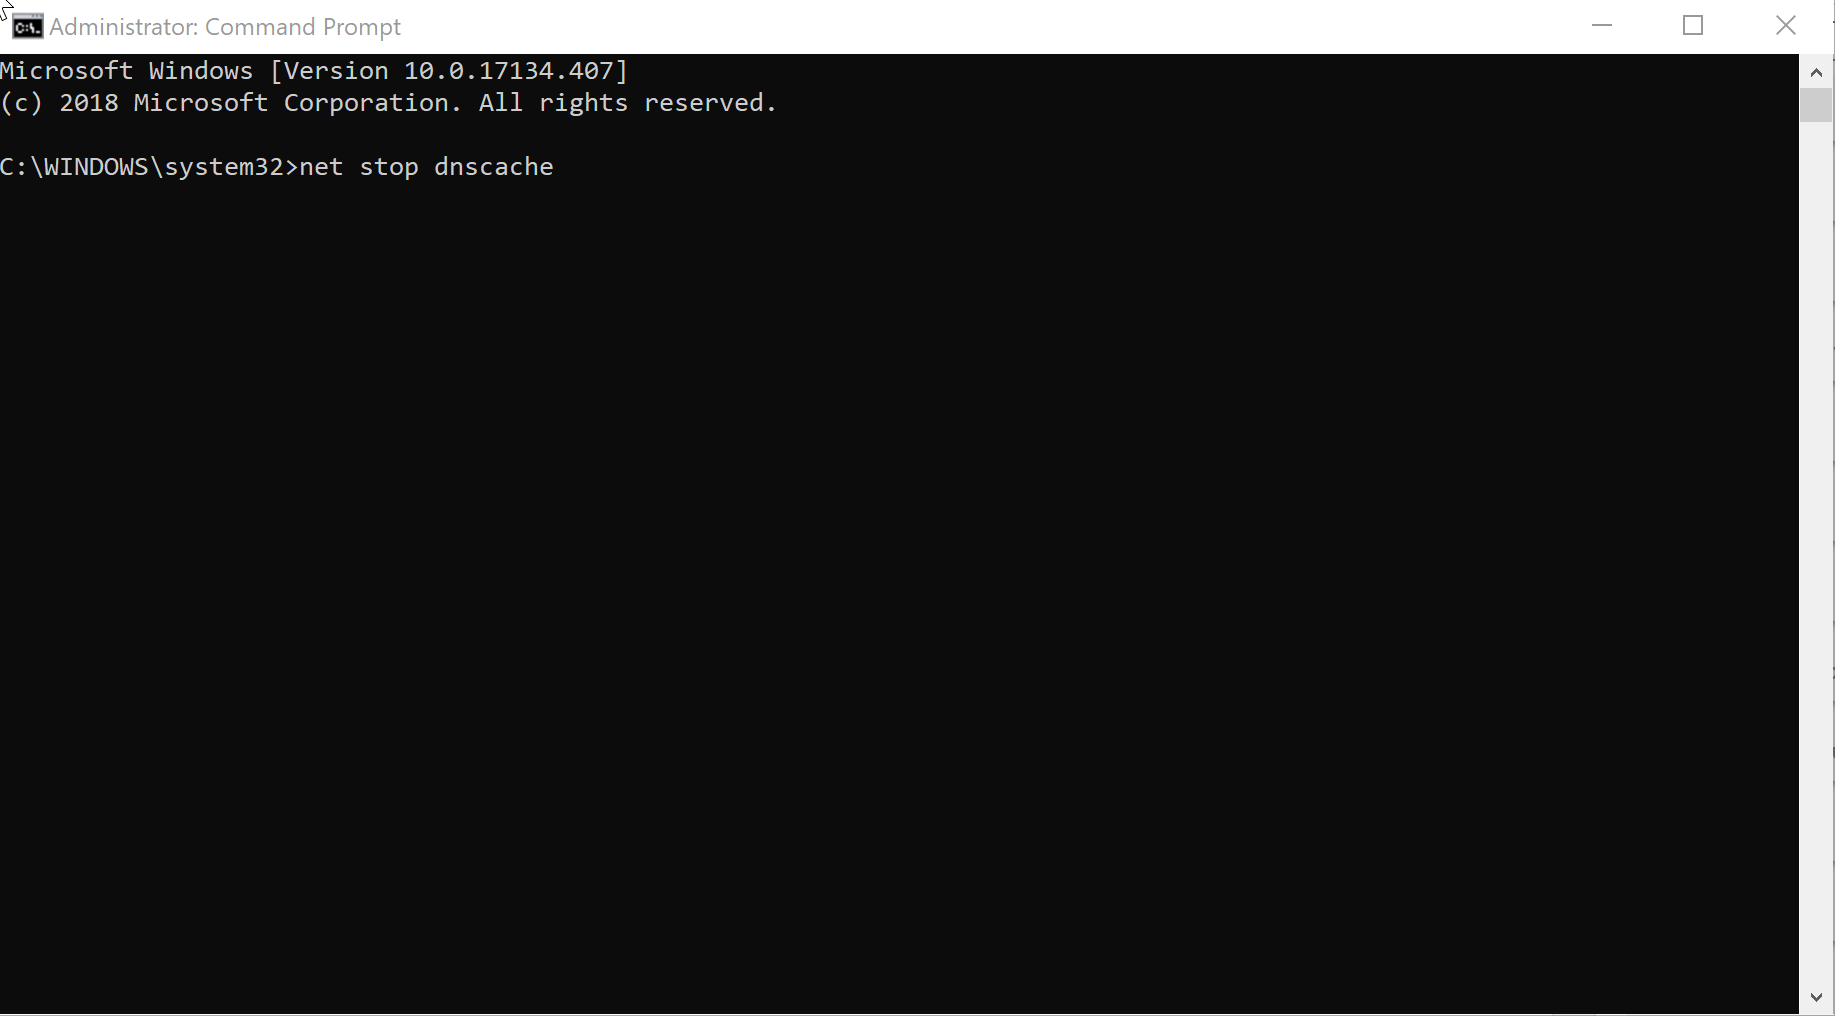 how to start/stop dns client from cmd prompt